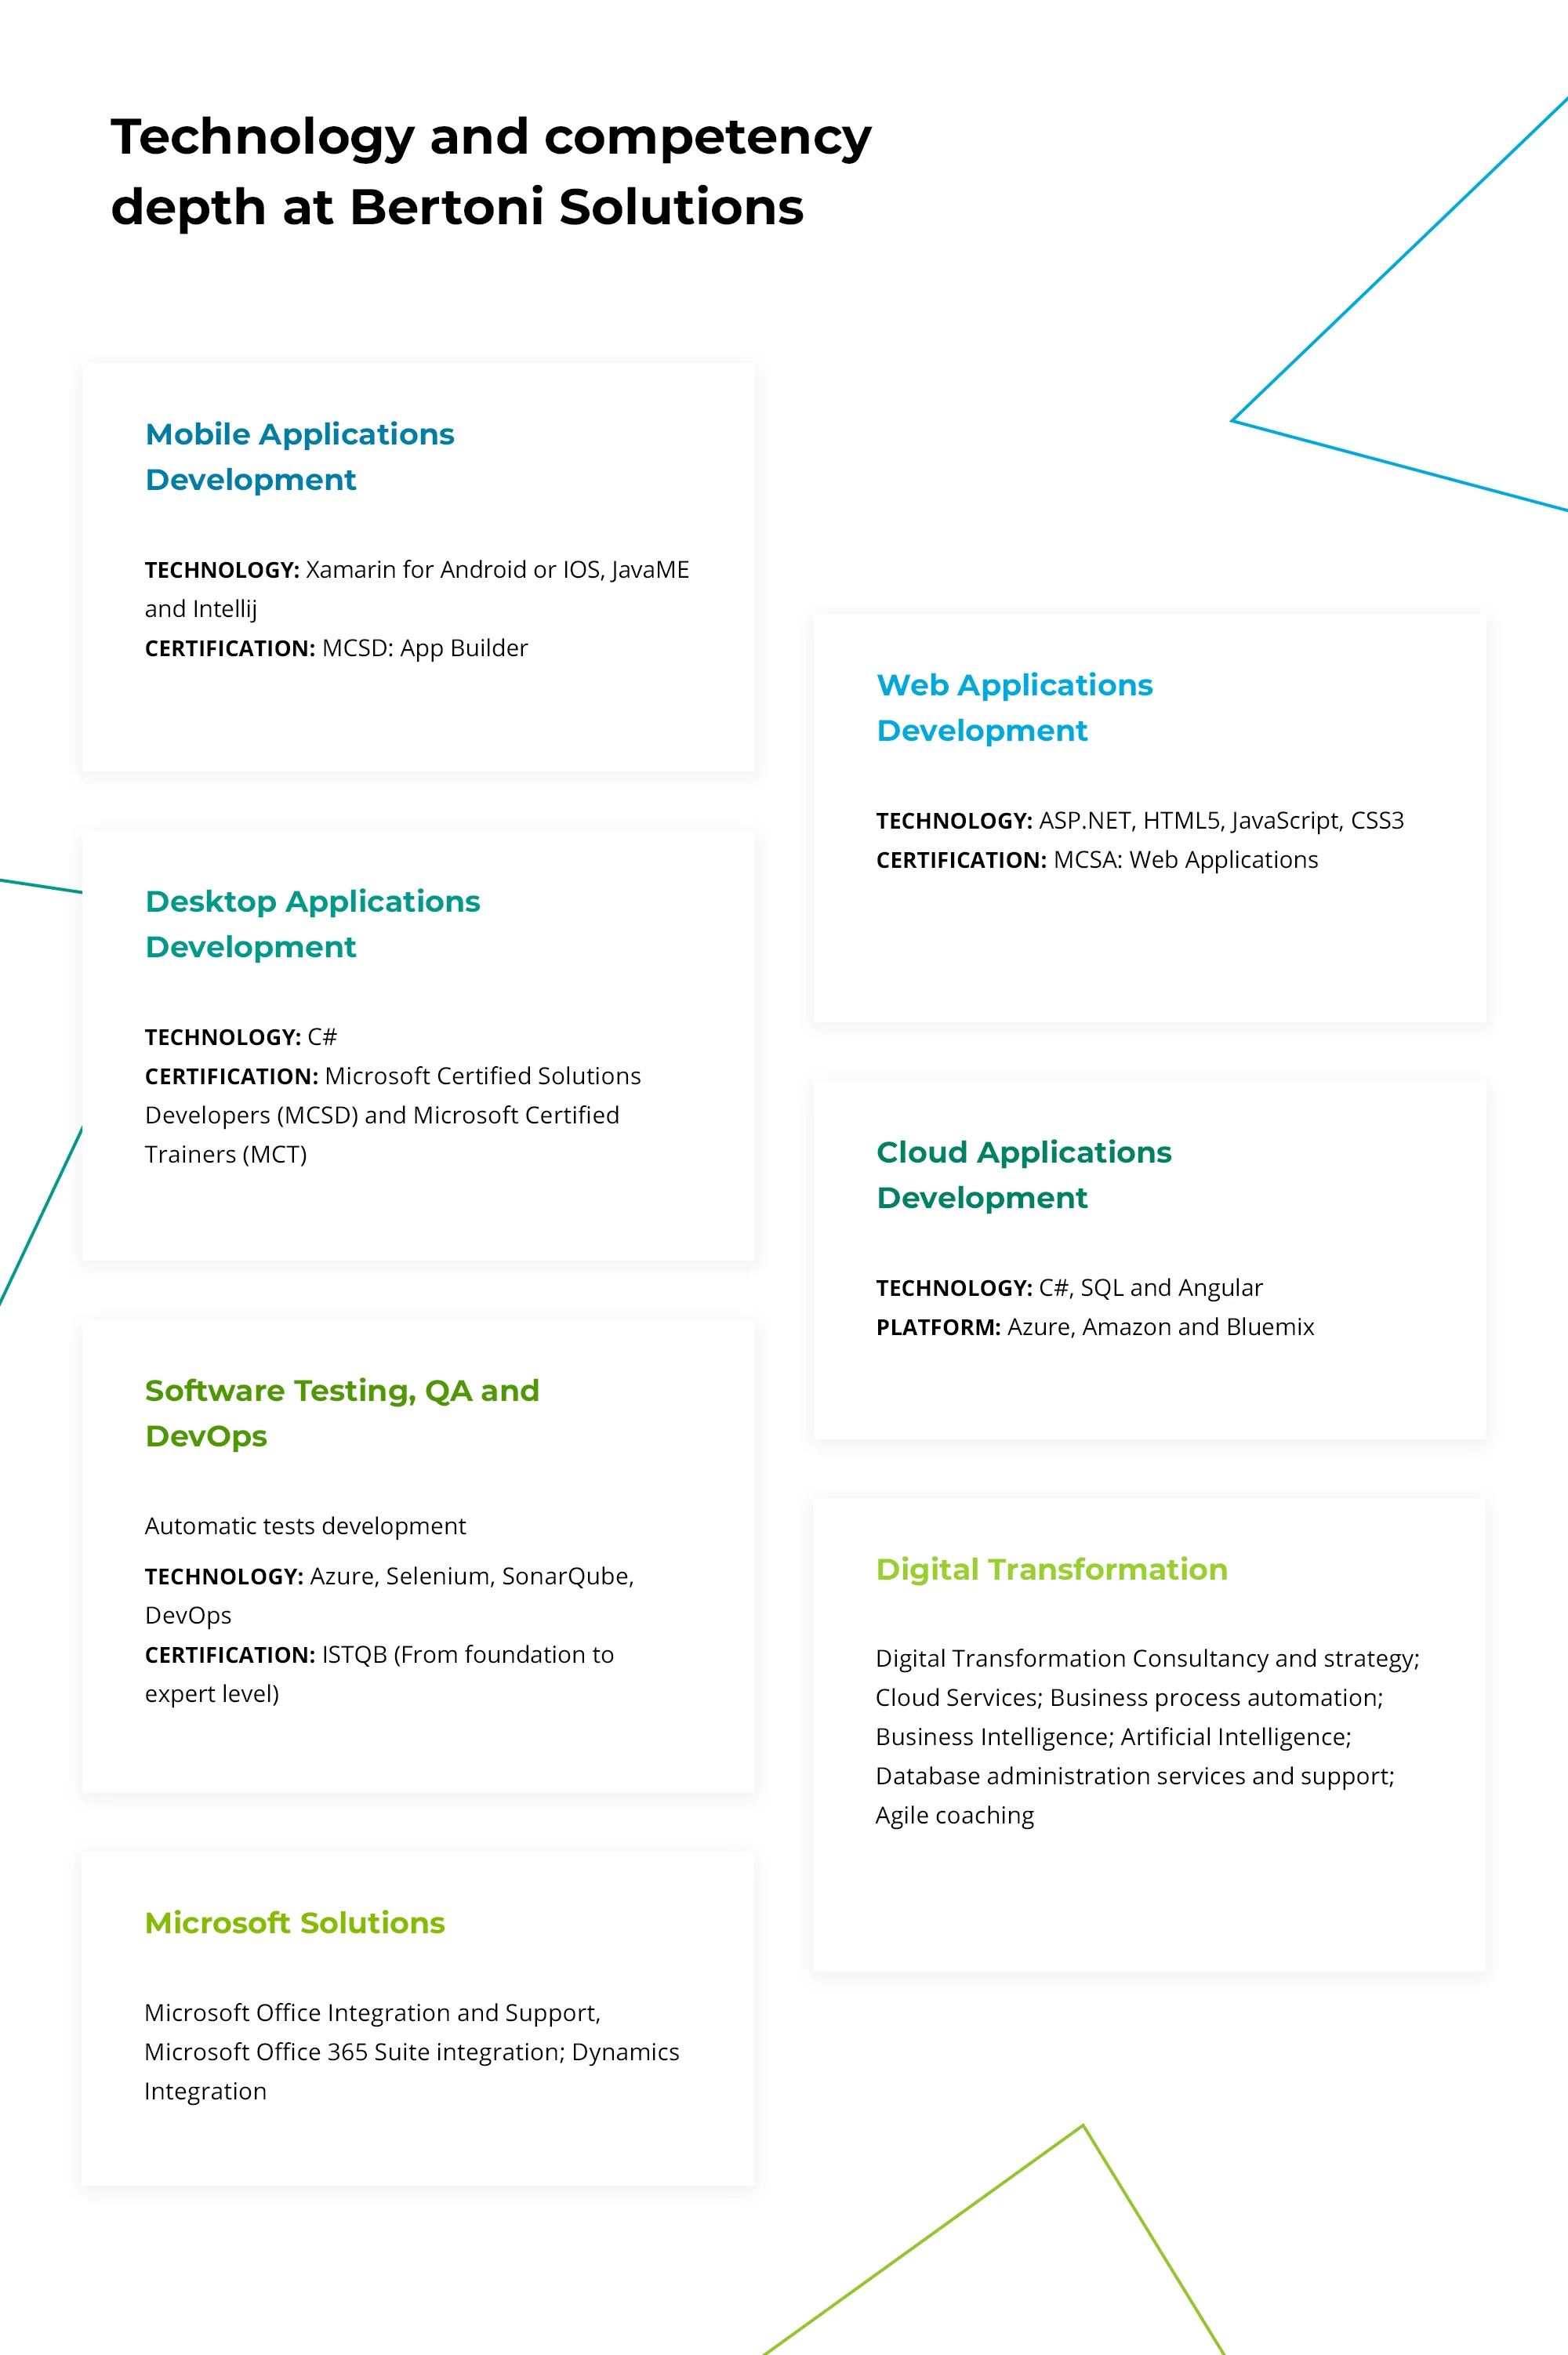 infographic, tecnology and competencies depth Bertoni Solutions 